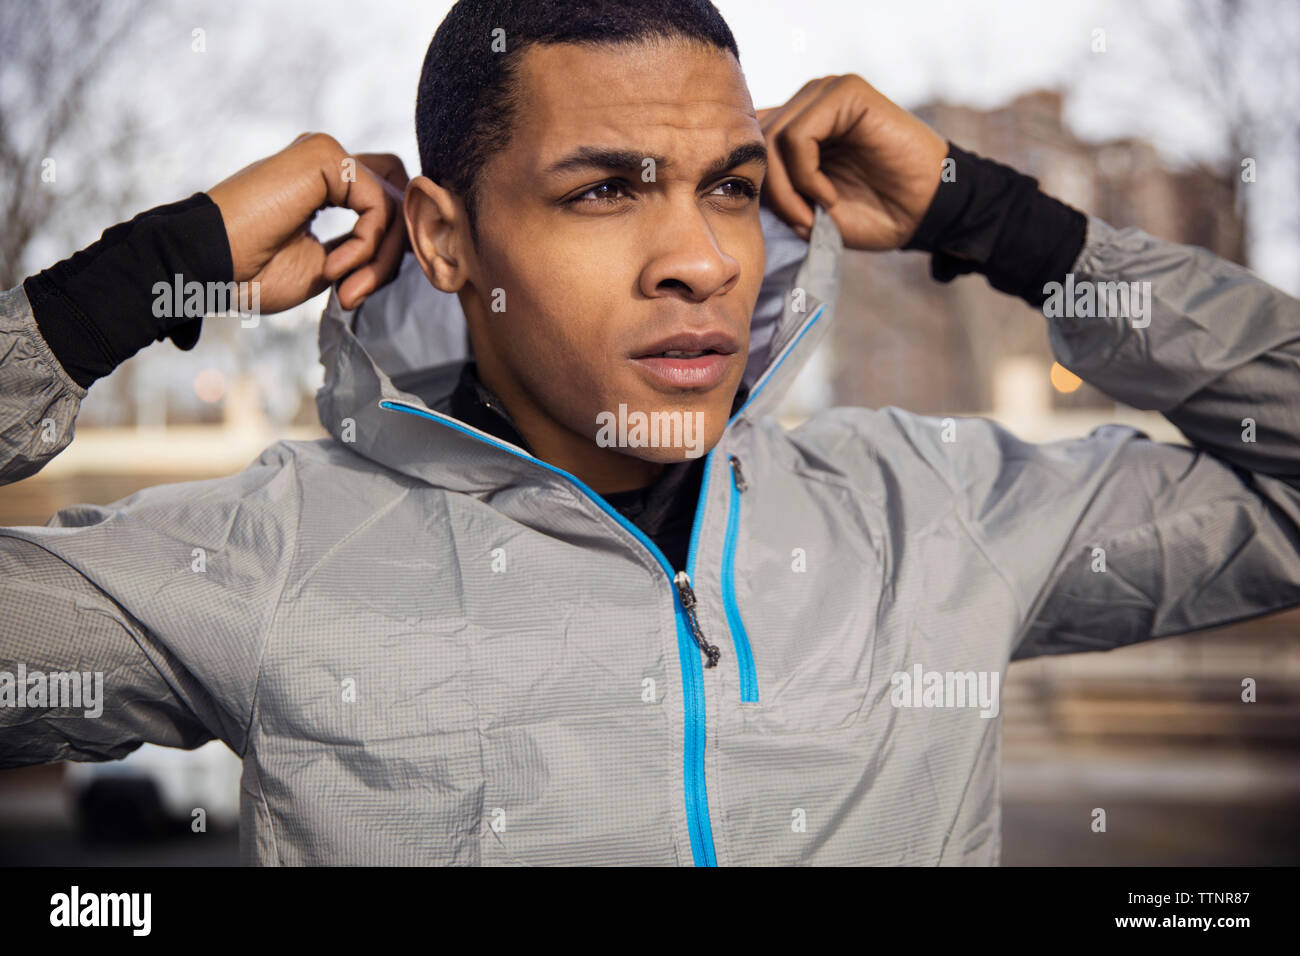 Confident male athlete wearing hooded jacket outdoors Stock Photo